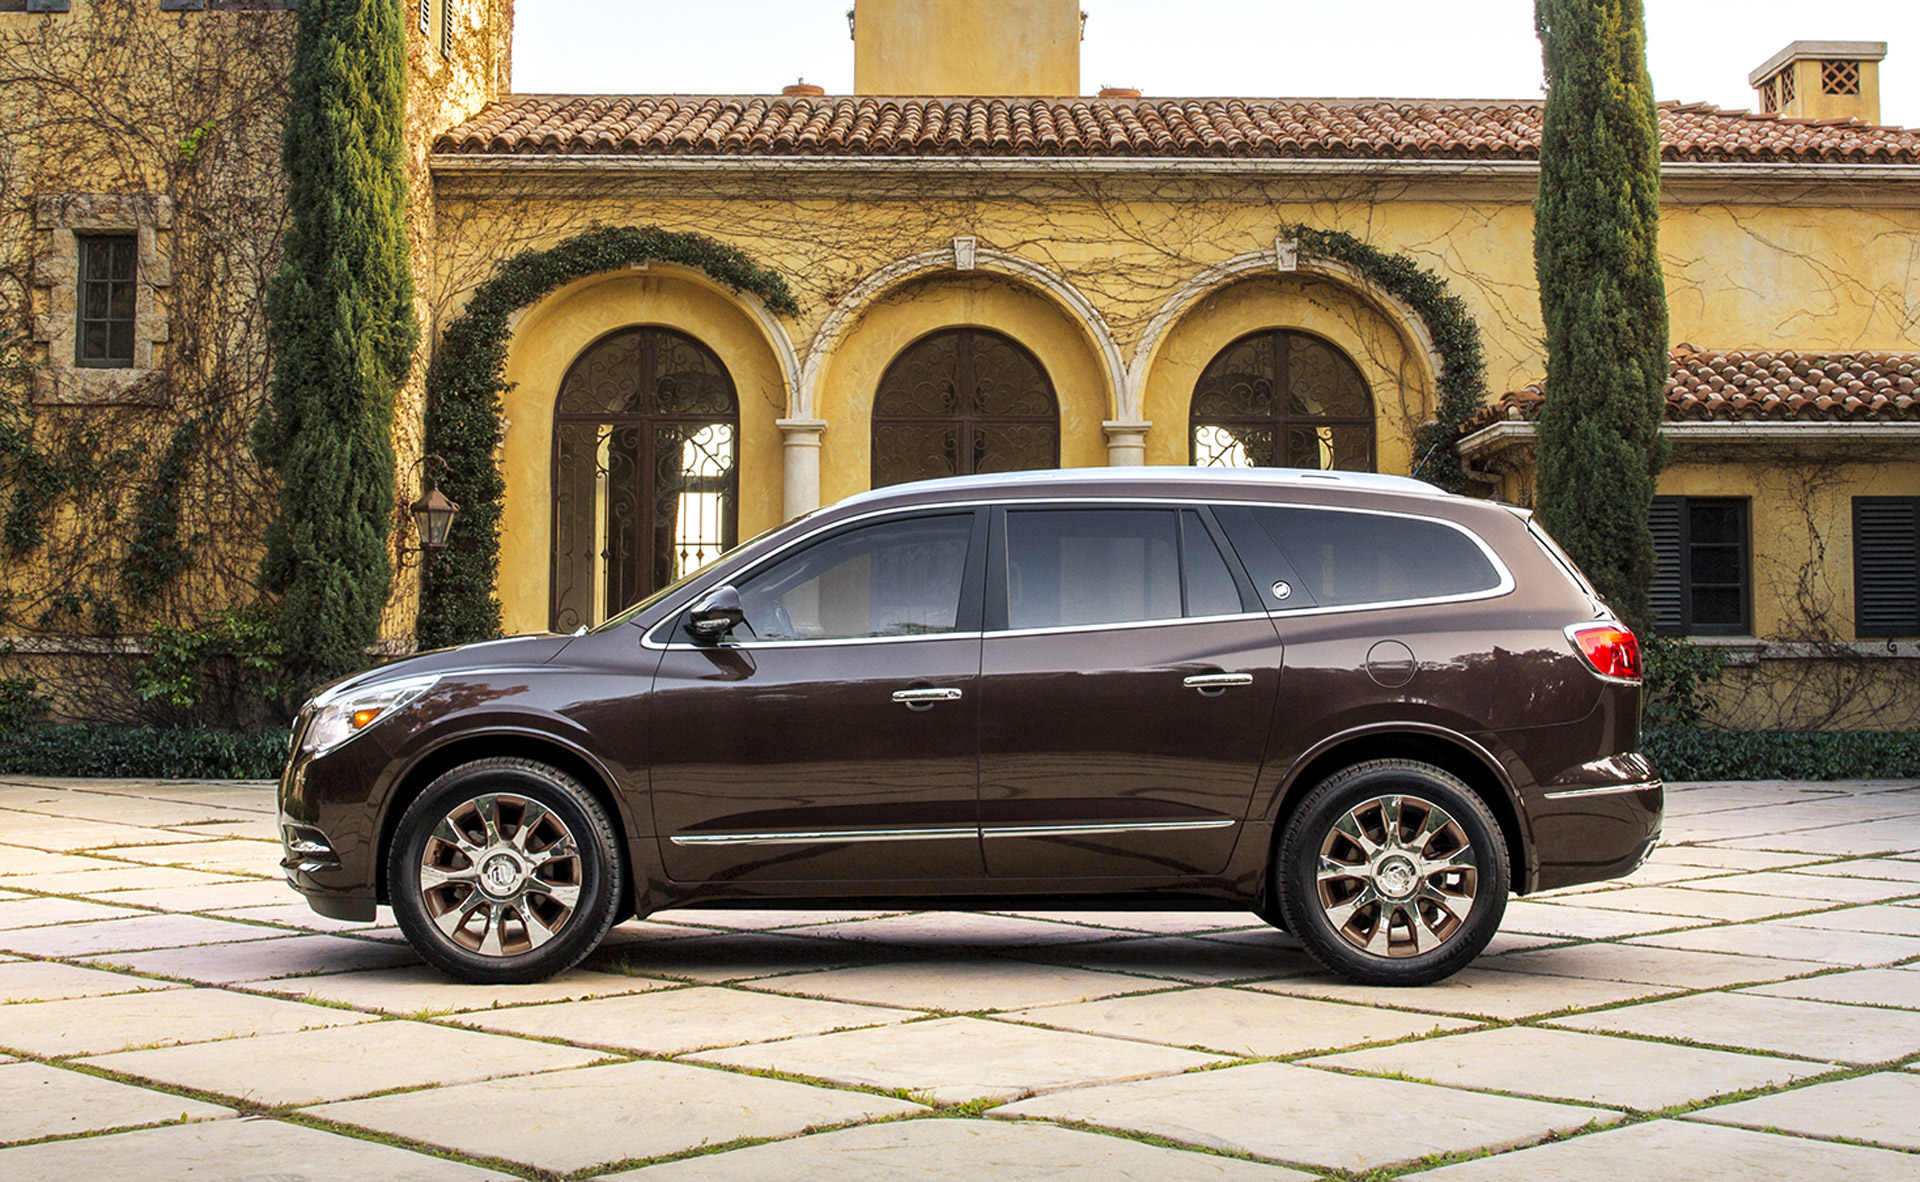 2016 Buick Enclave Gets Tuscan Edition Trim